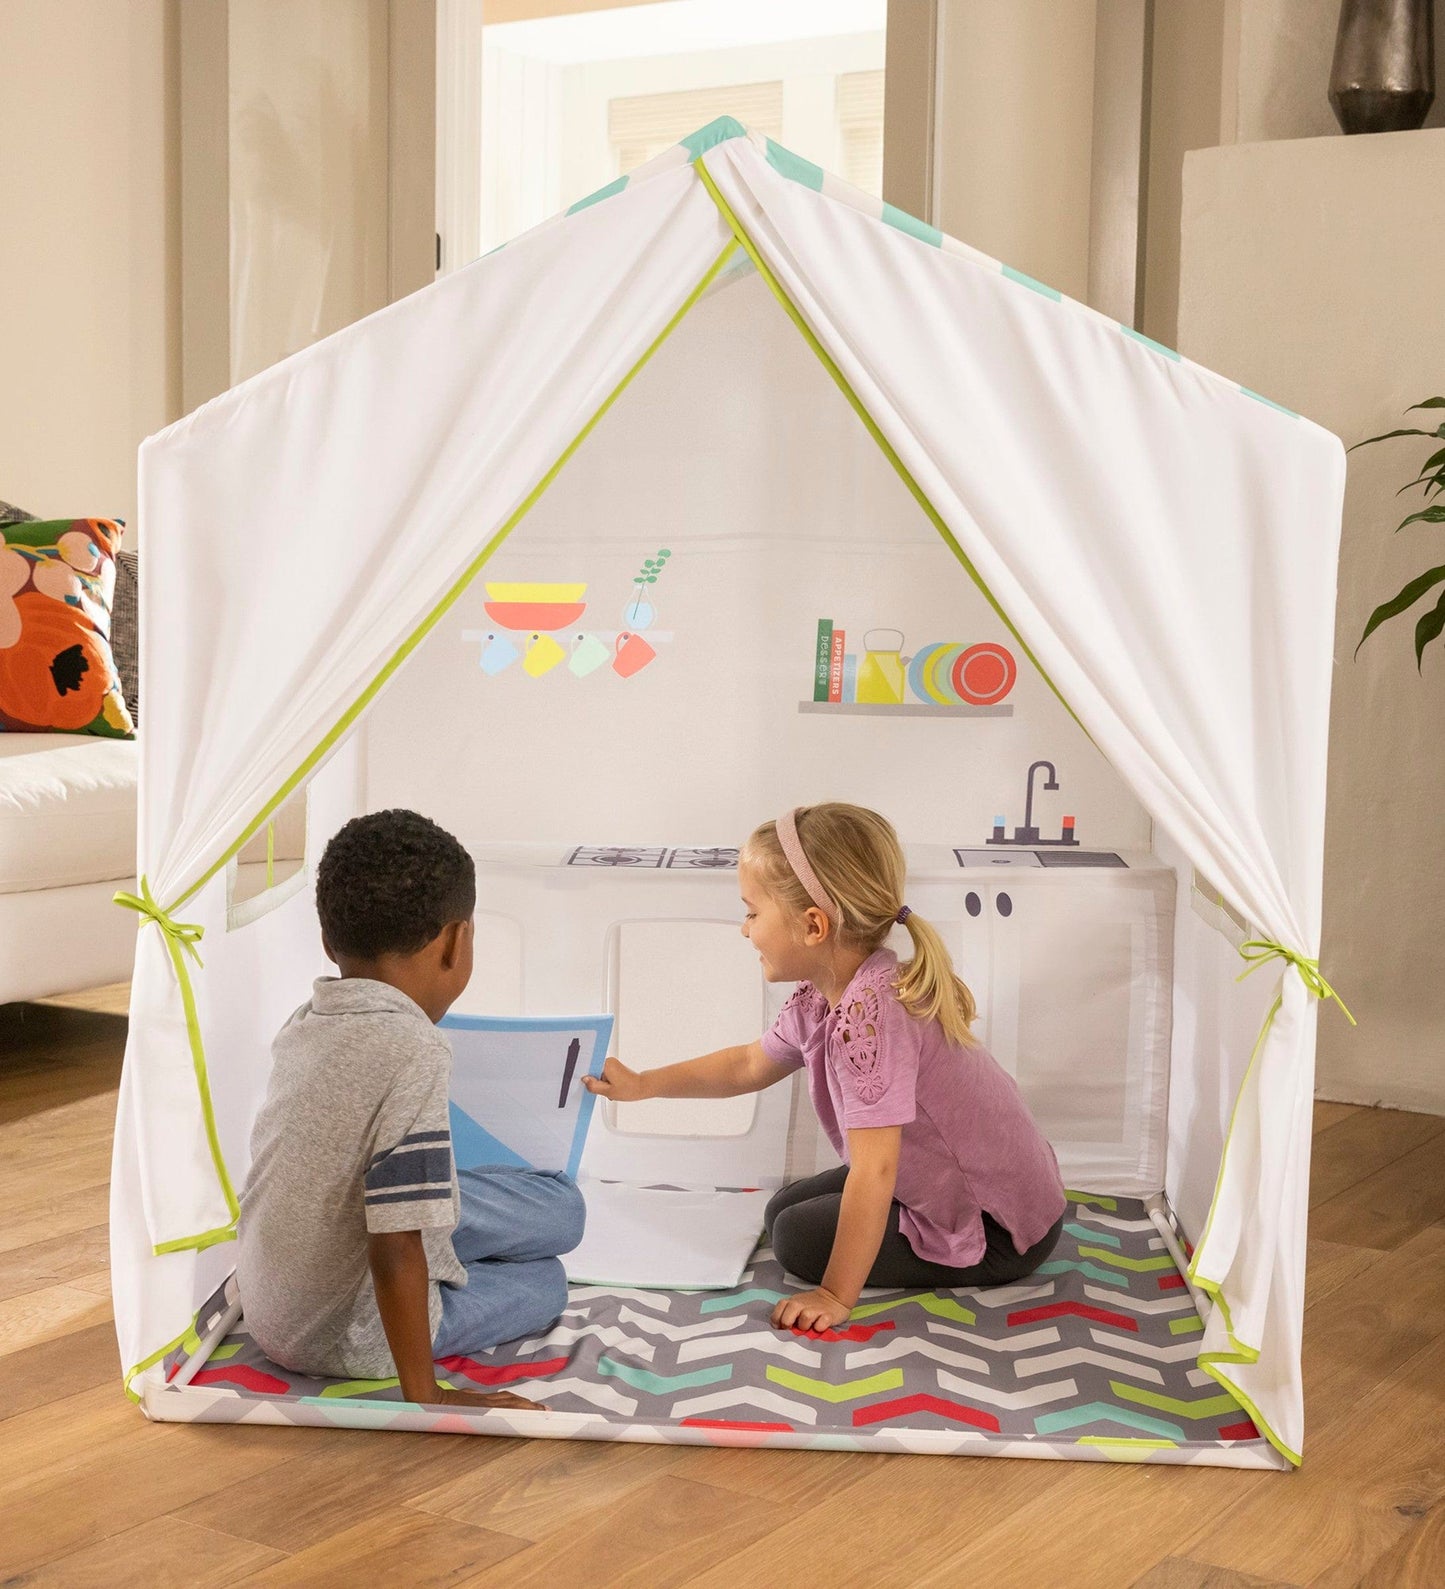 50-Inch Kitchen Playhouse Tent with 7-Piece Kitchen Cooking Set